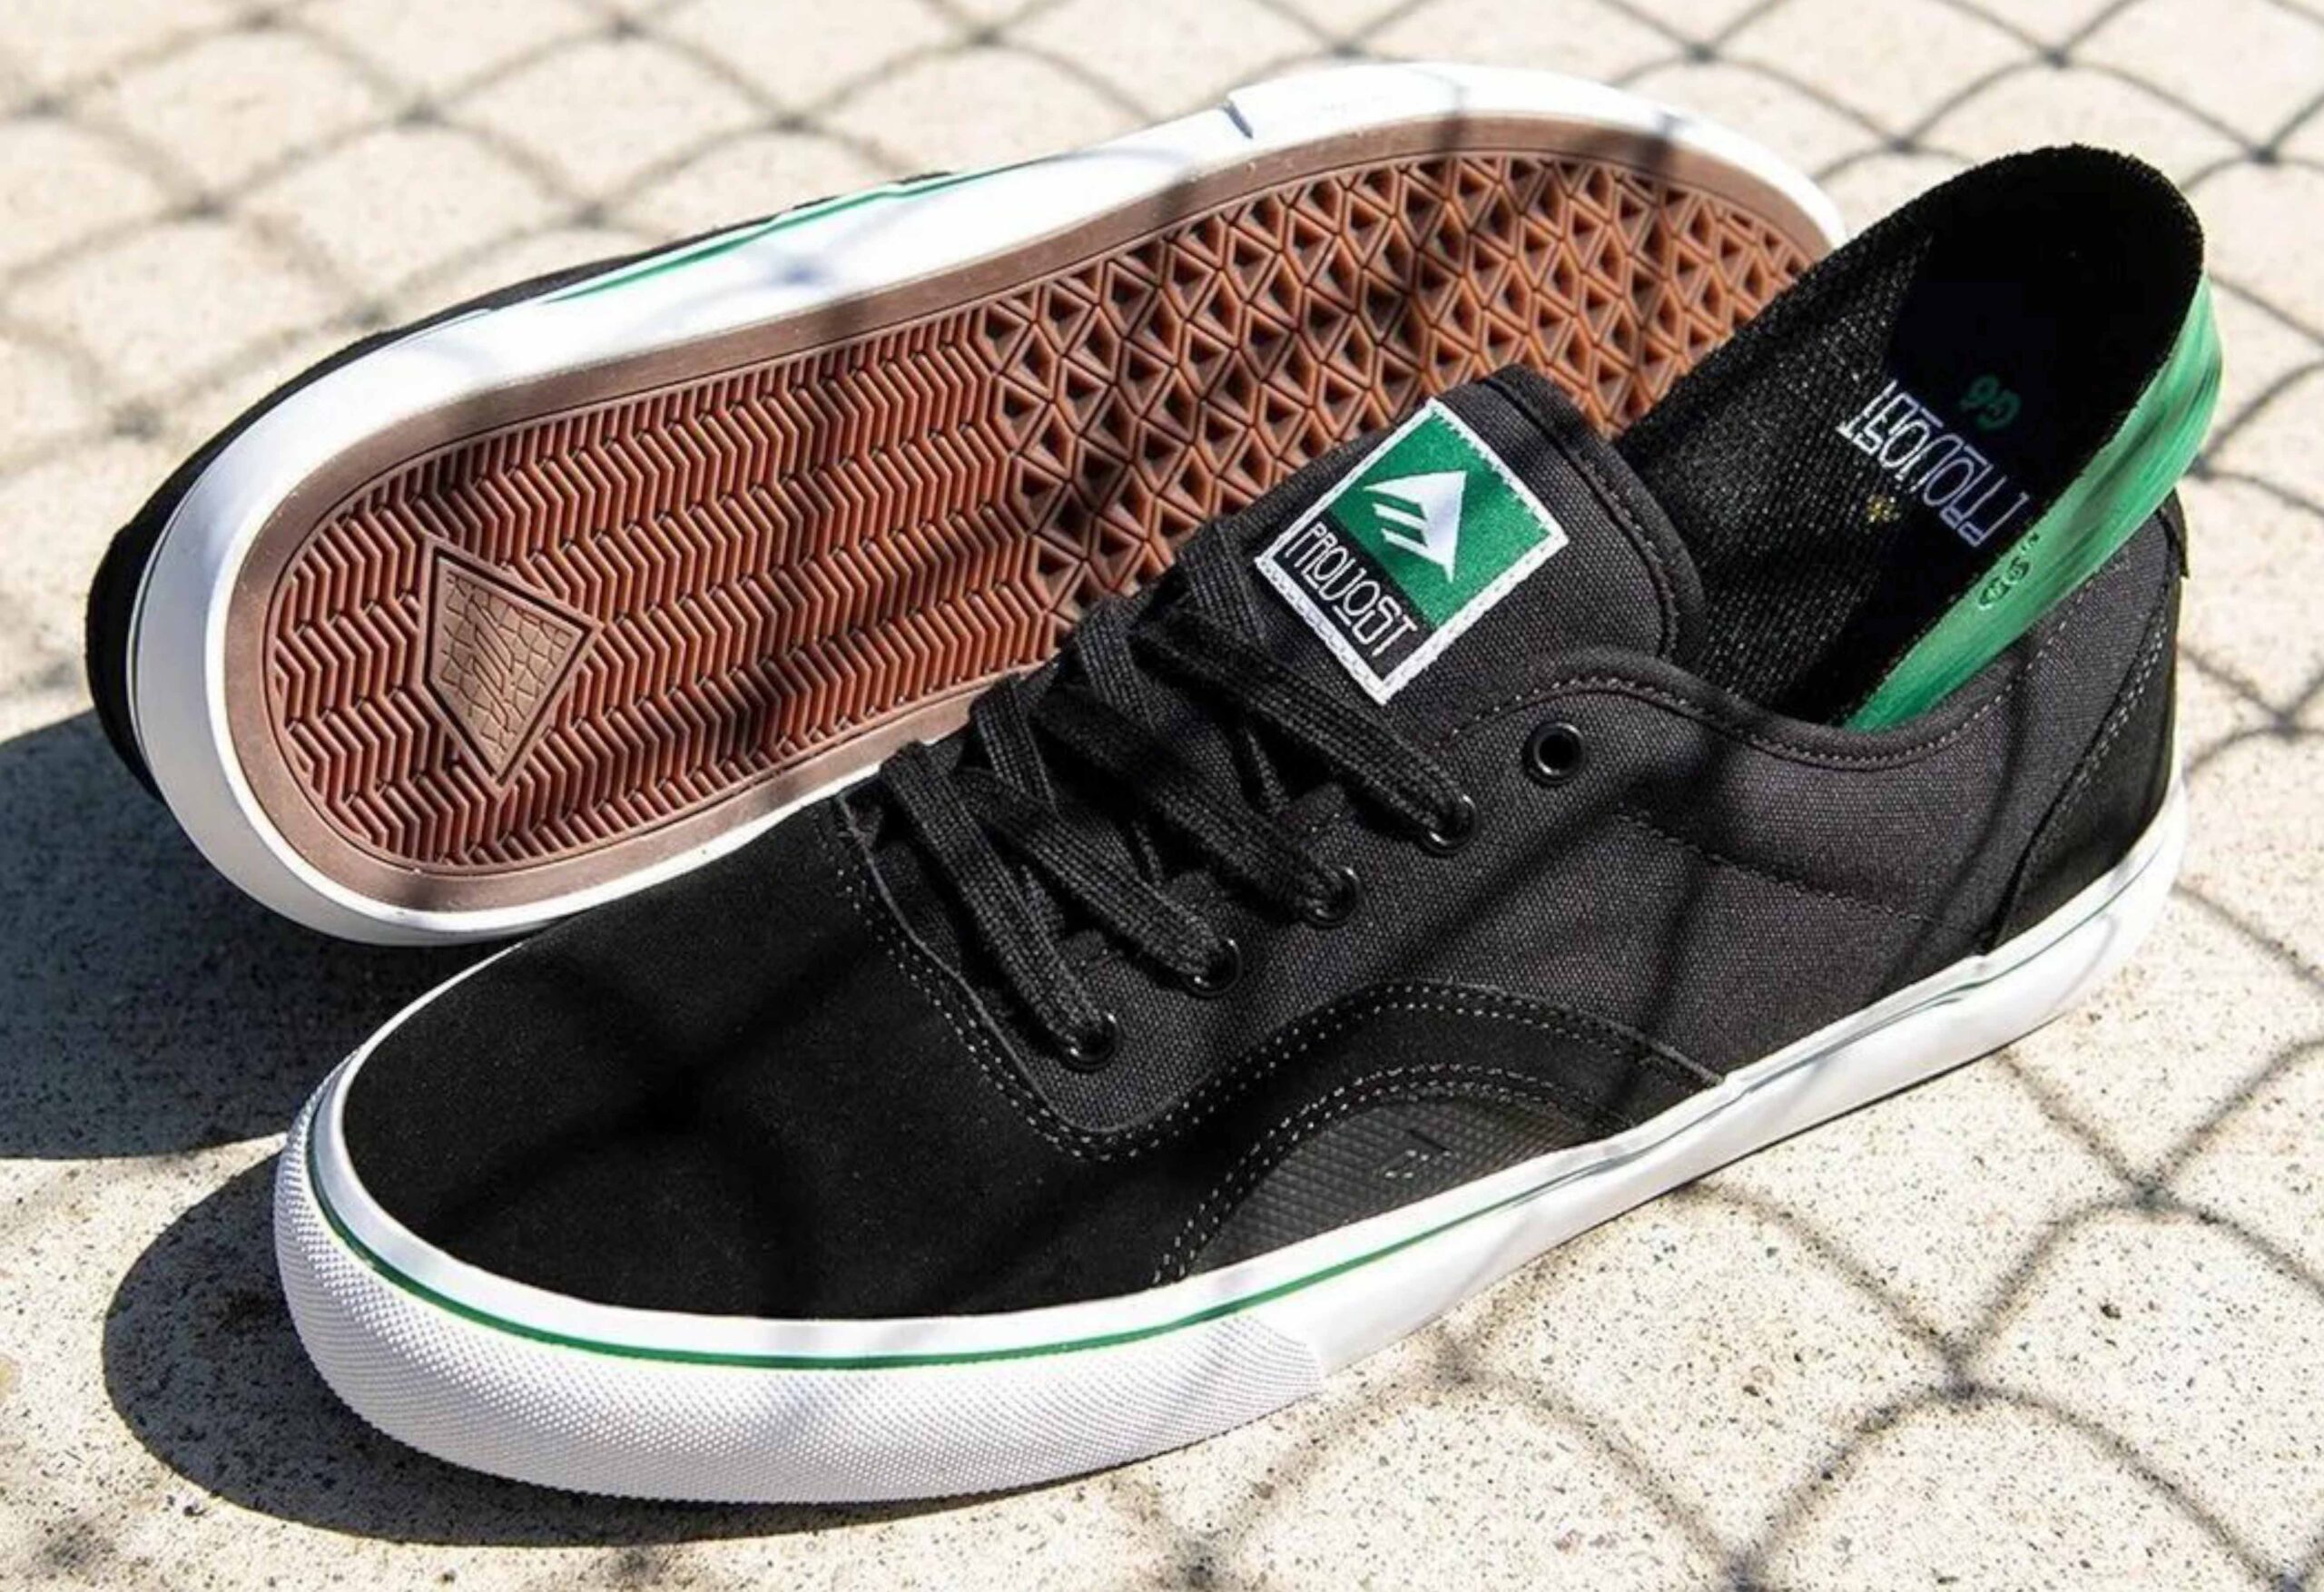 Emerica Releases The Provost G6, Collin Provost's Newest Pro Shoe